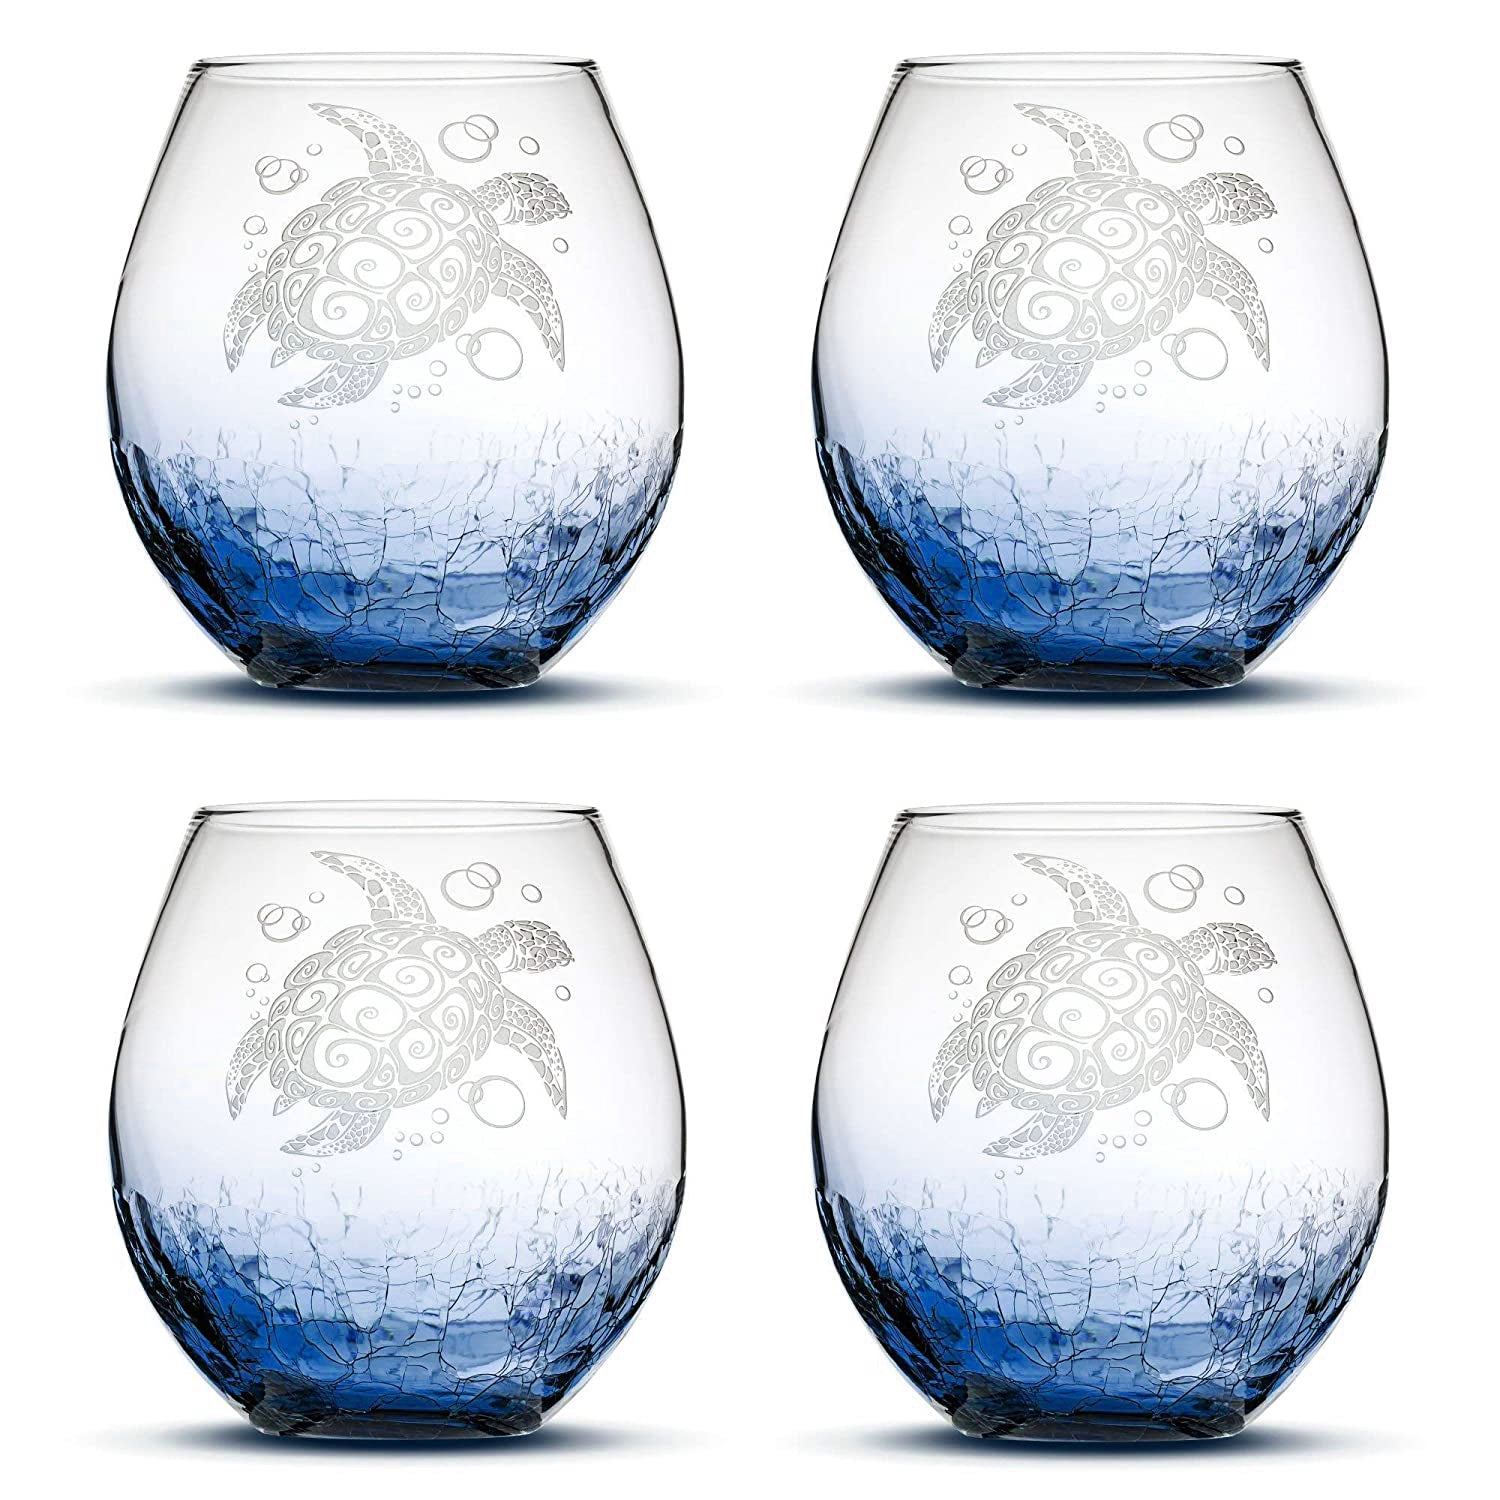 Crackle Wine Glass with Tribal Sea Turtle Design, Set of 4, Laser Etched or Hand Etched